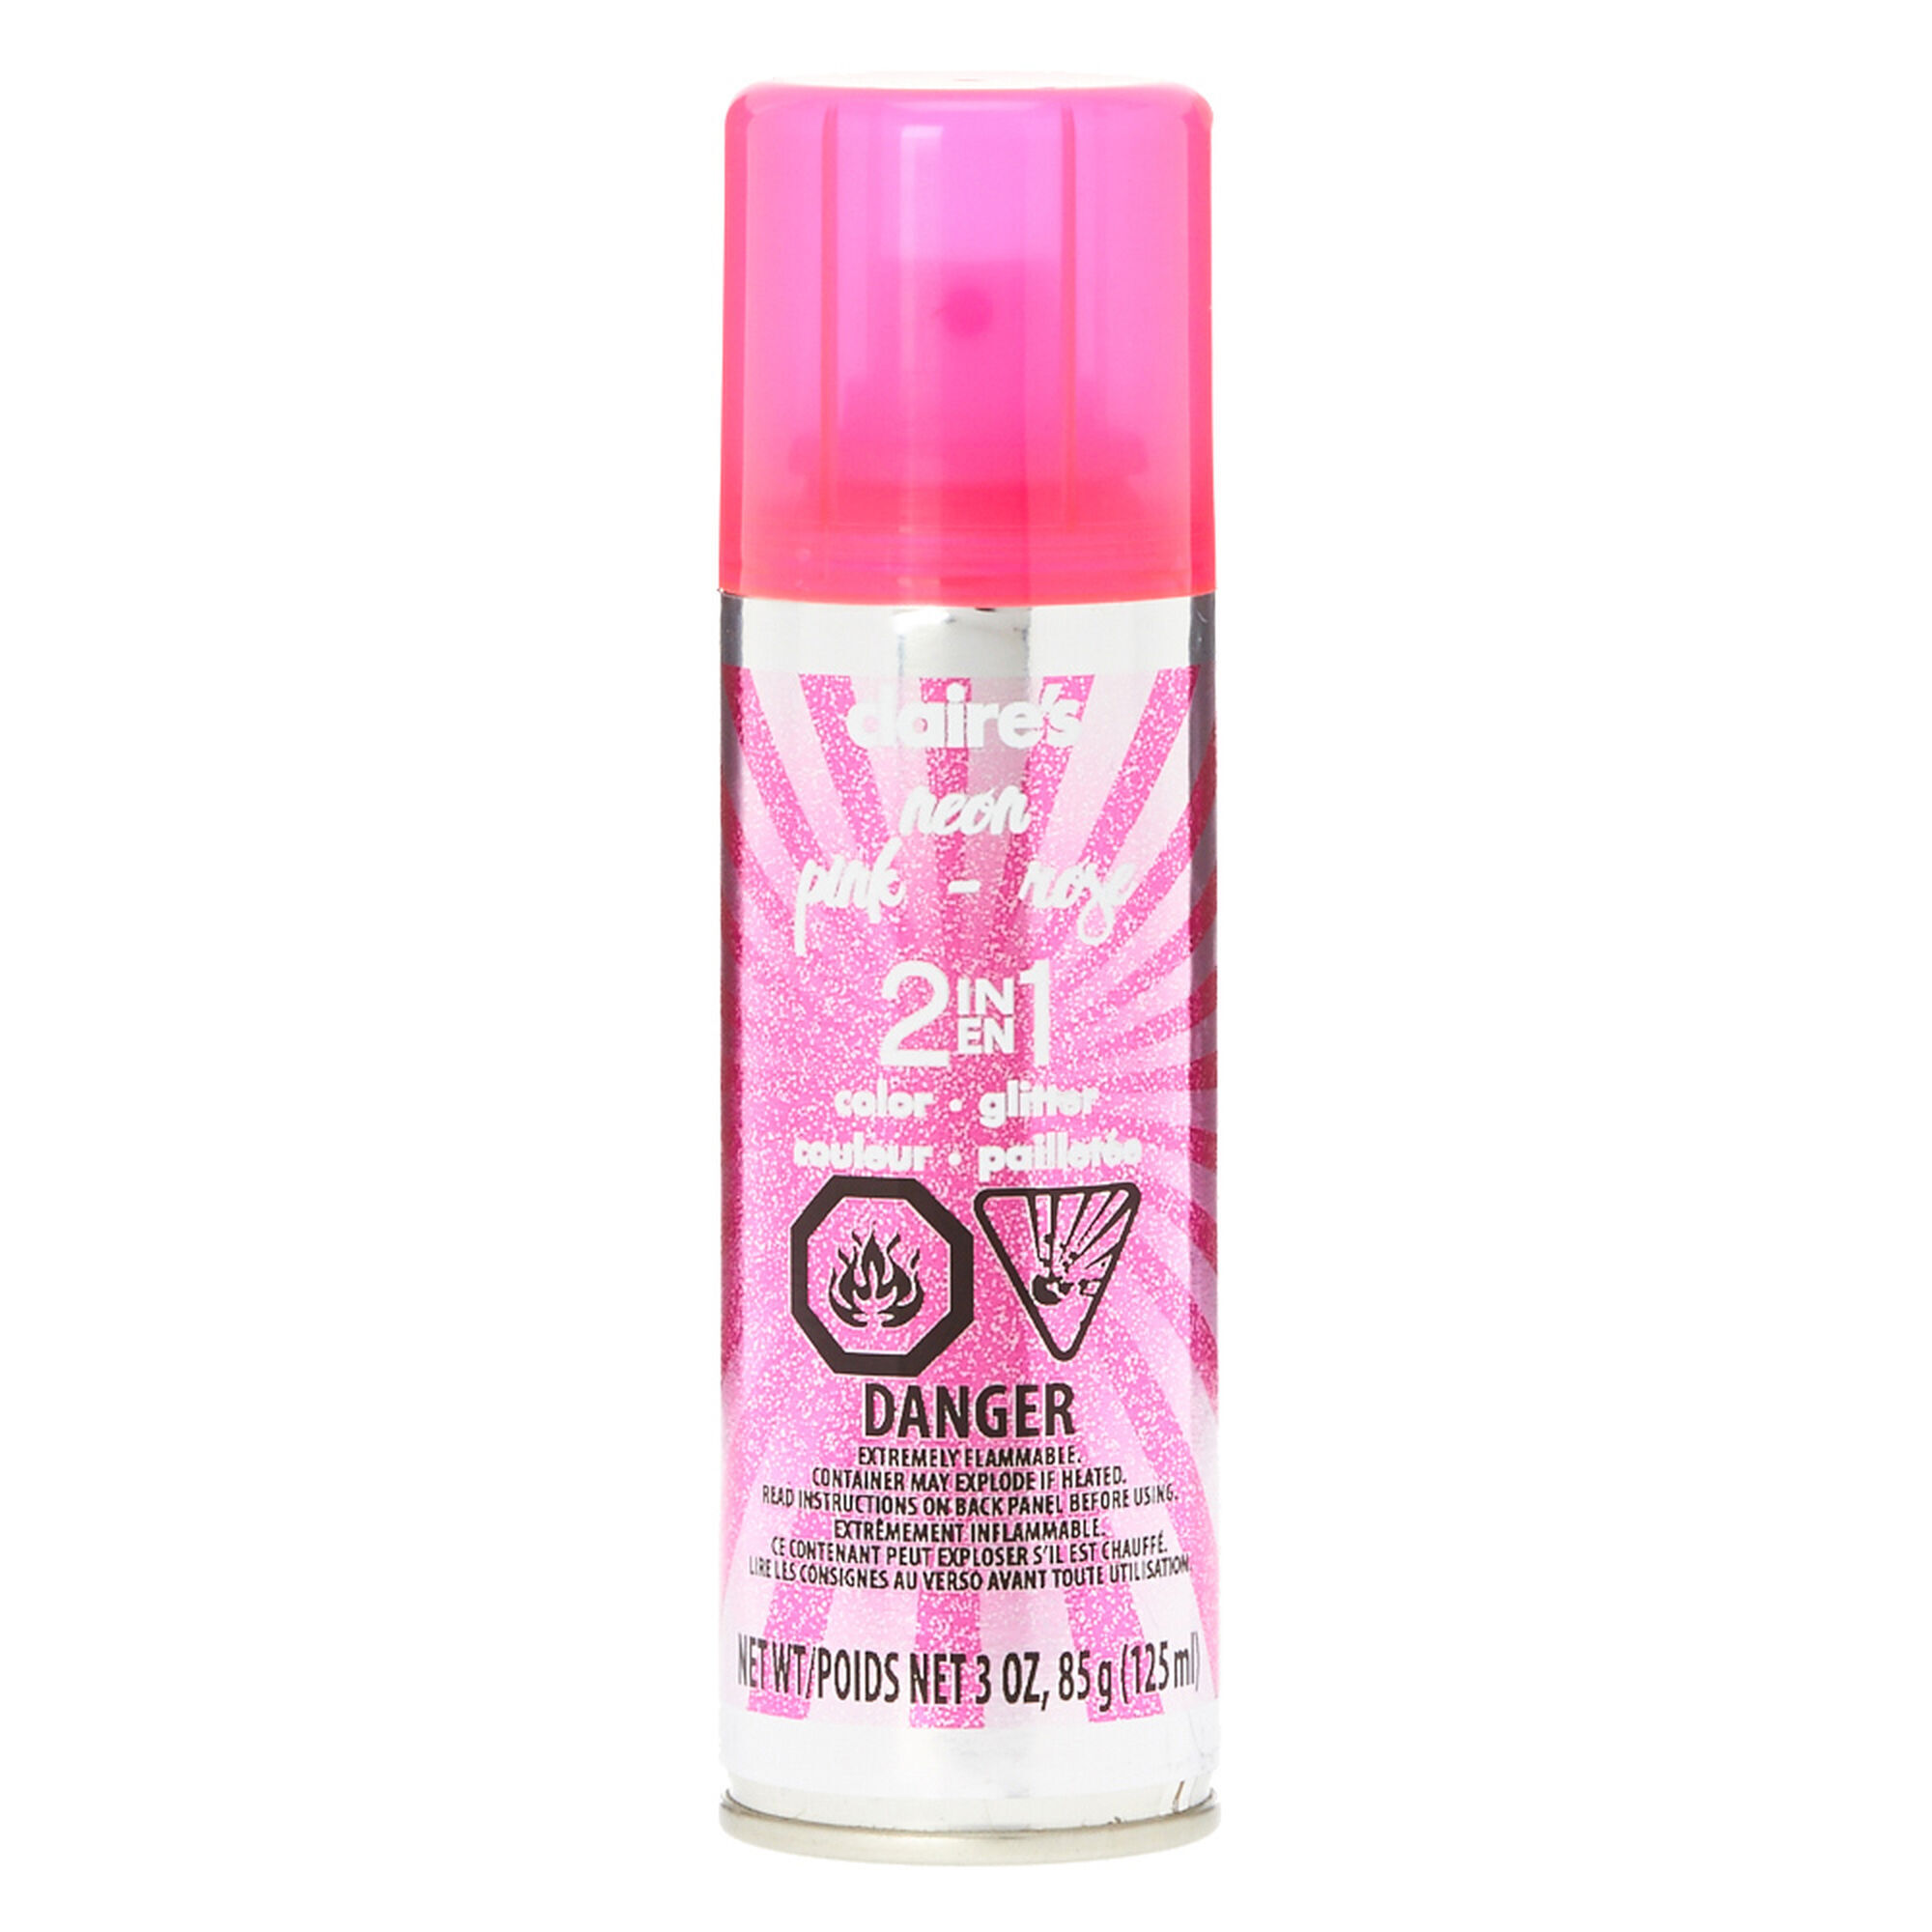 View Claires Neon Glitter 2 In 1 Temporary Color Hair Spray Pink information